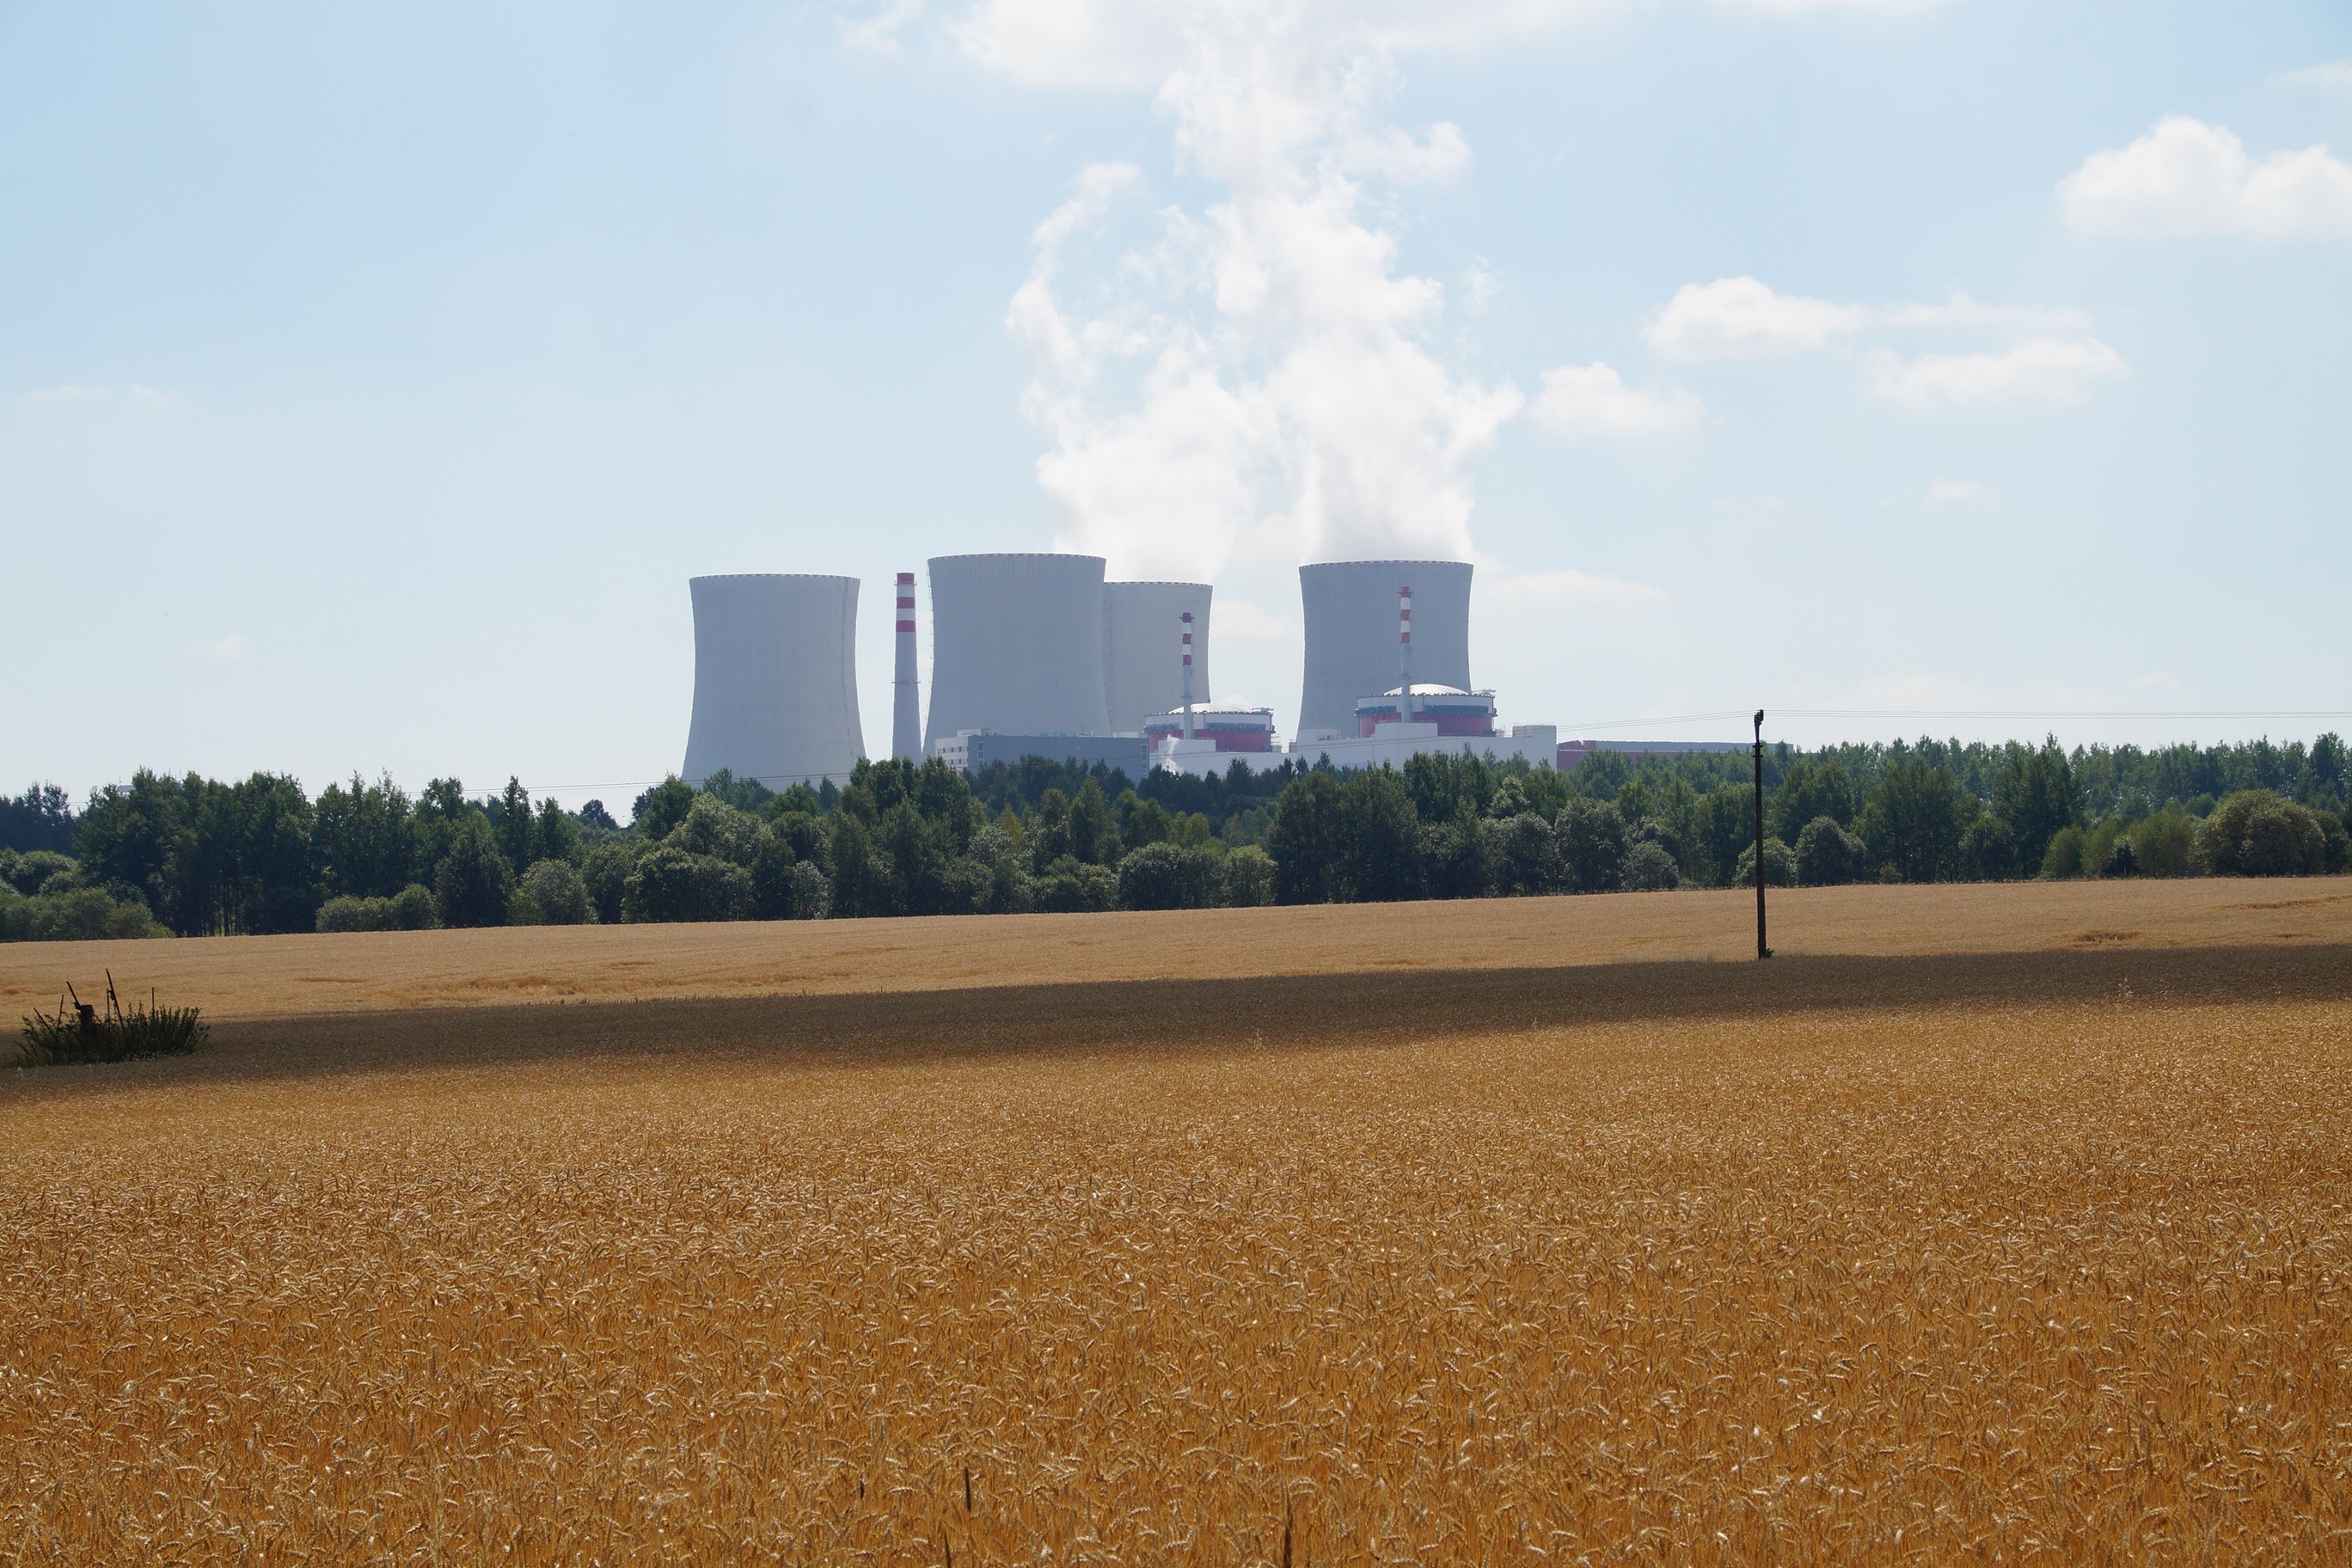 Chimneys of temelin nuclear power plant free image download